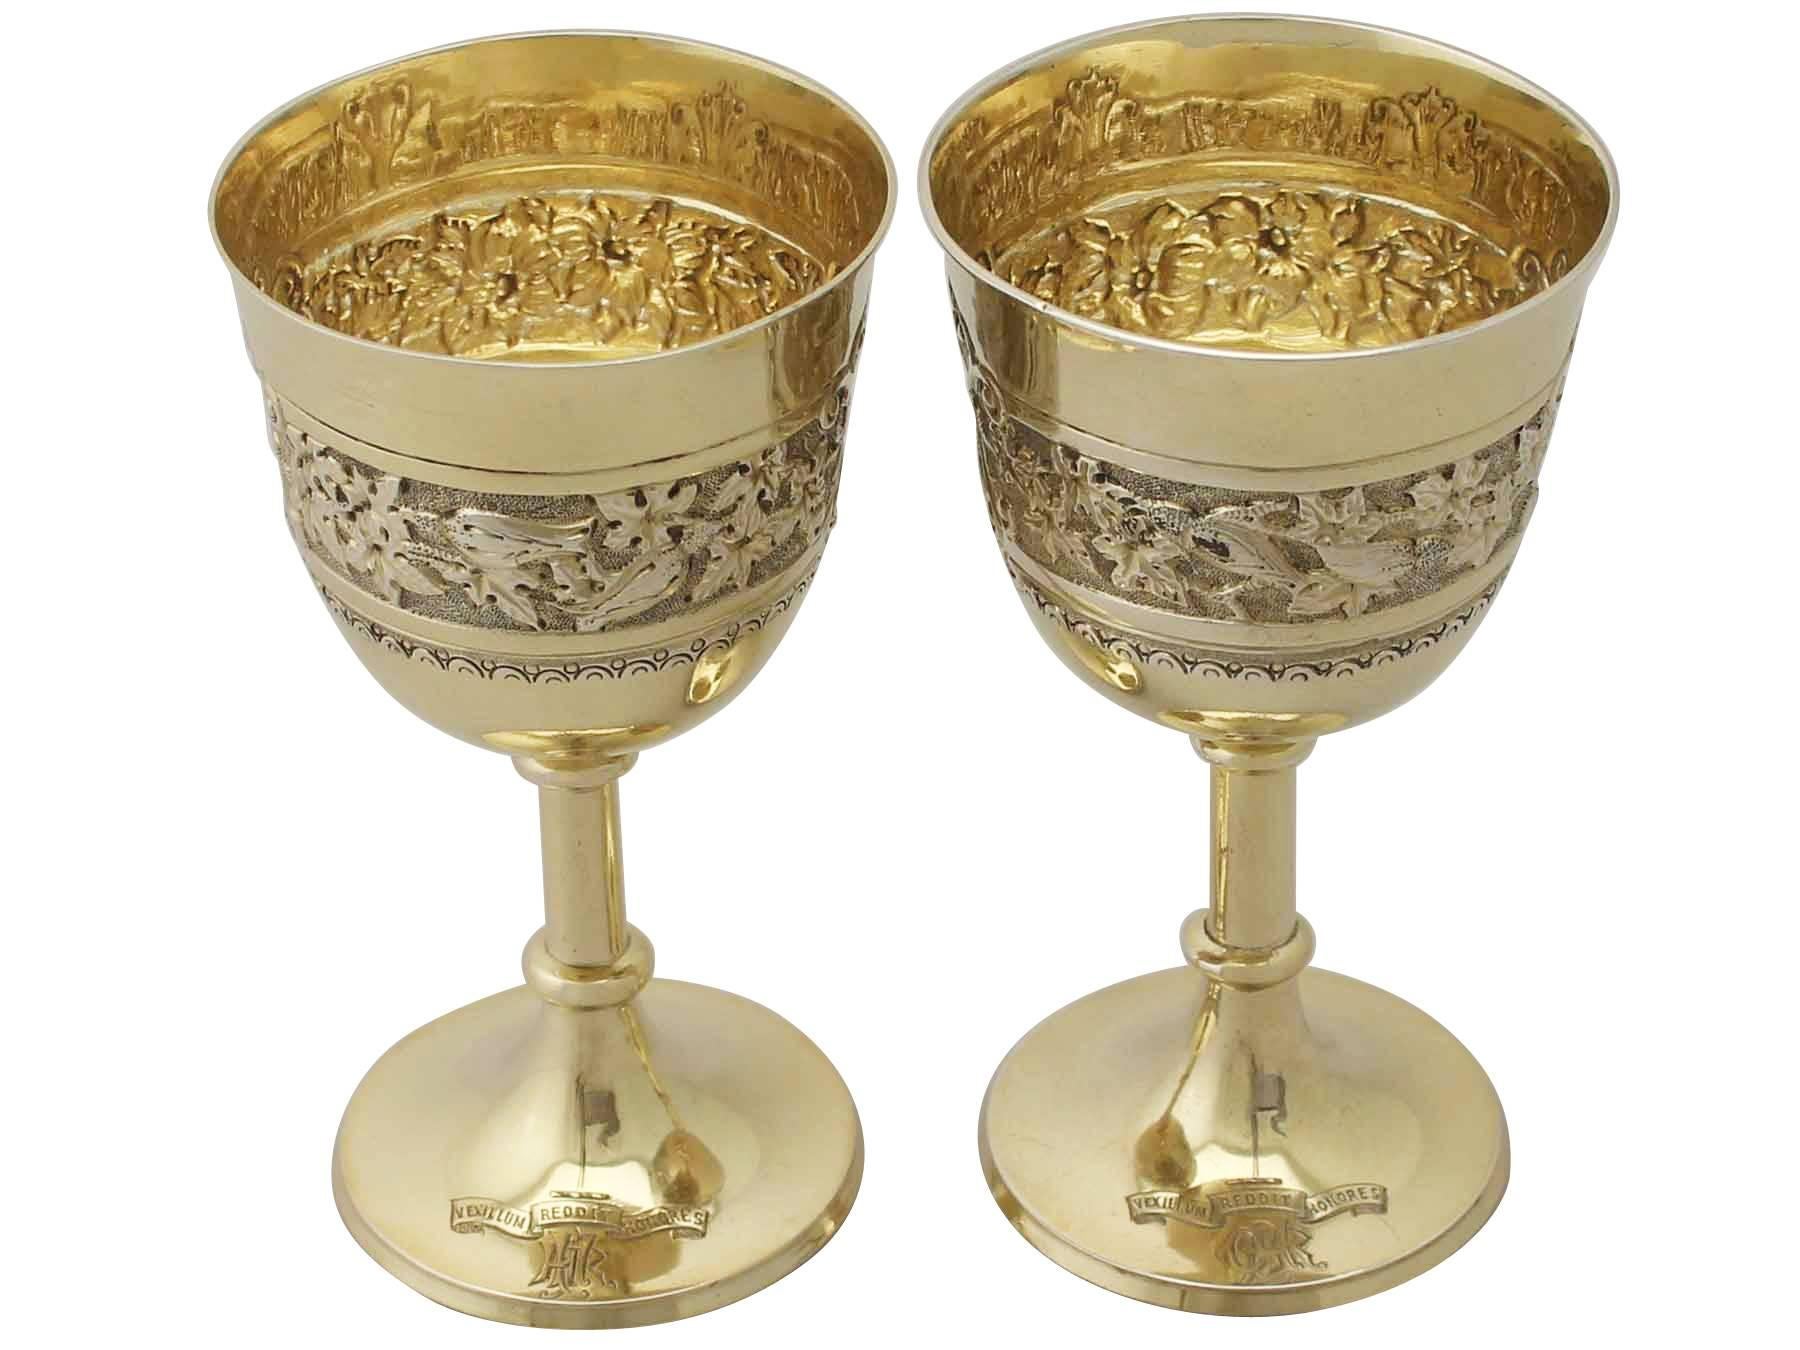 These exceptional antique Victorian sterling silver gilt goblets have a bell shaped form supported by a plain knopped pedestal to a circular spreading foot.

The surface of these Victorian goblets are embellished with chased bands of floral and